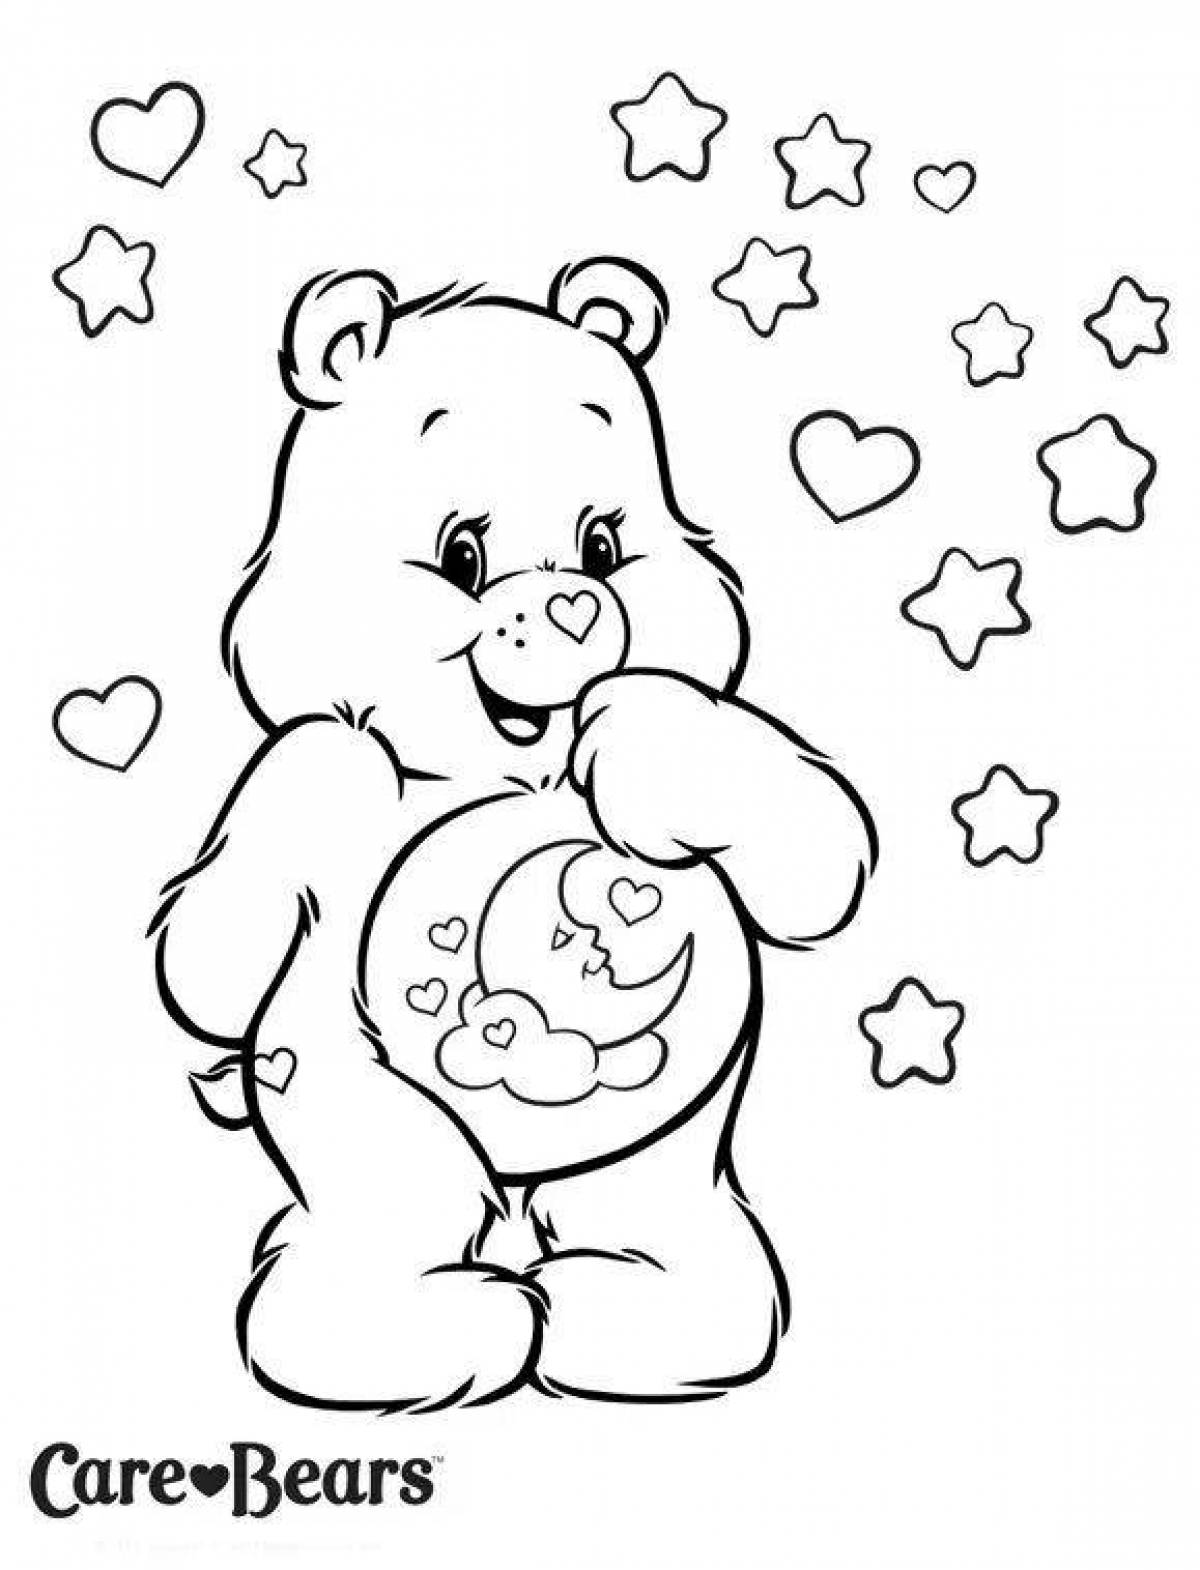 Cute and smiling bear coloring book